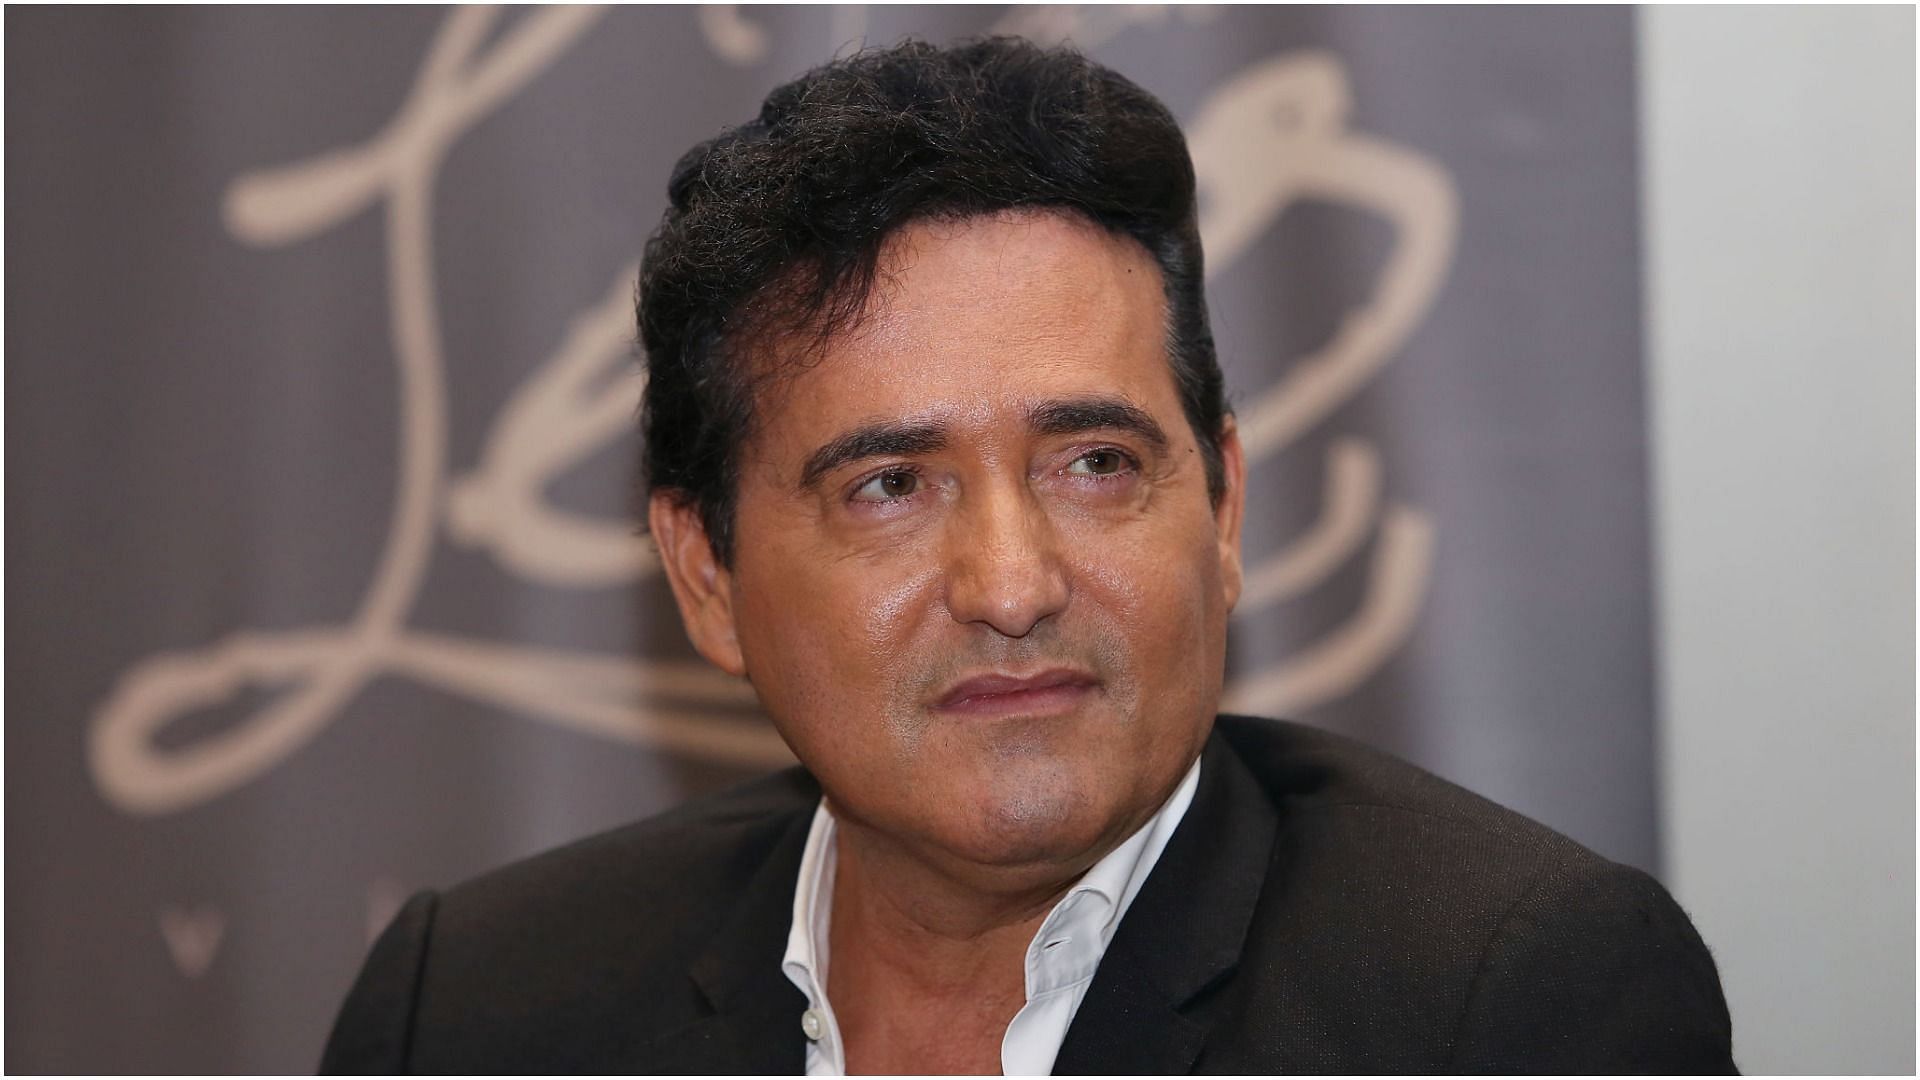 Carlos Mar&iacute;n recently died at the age of 53 (Image by Adrian Monroy via Getty Images)